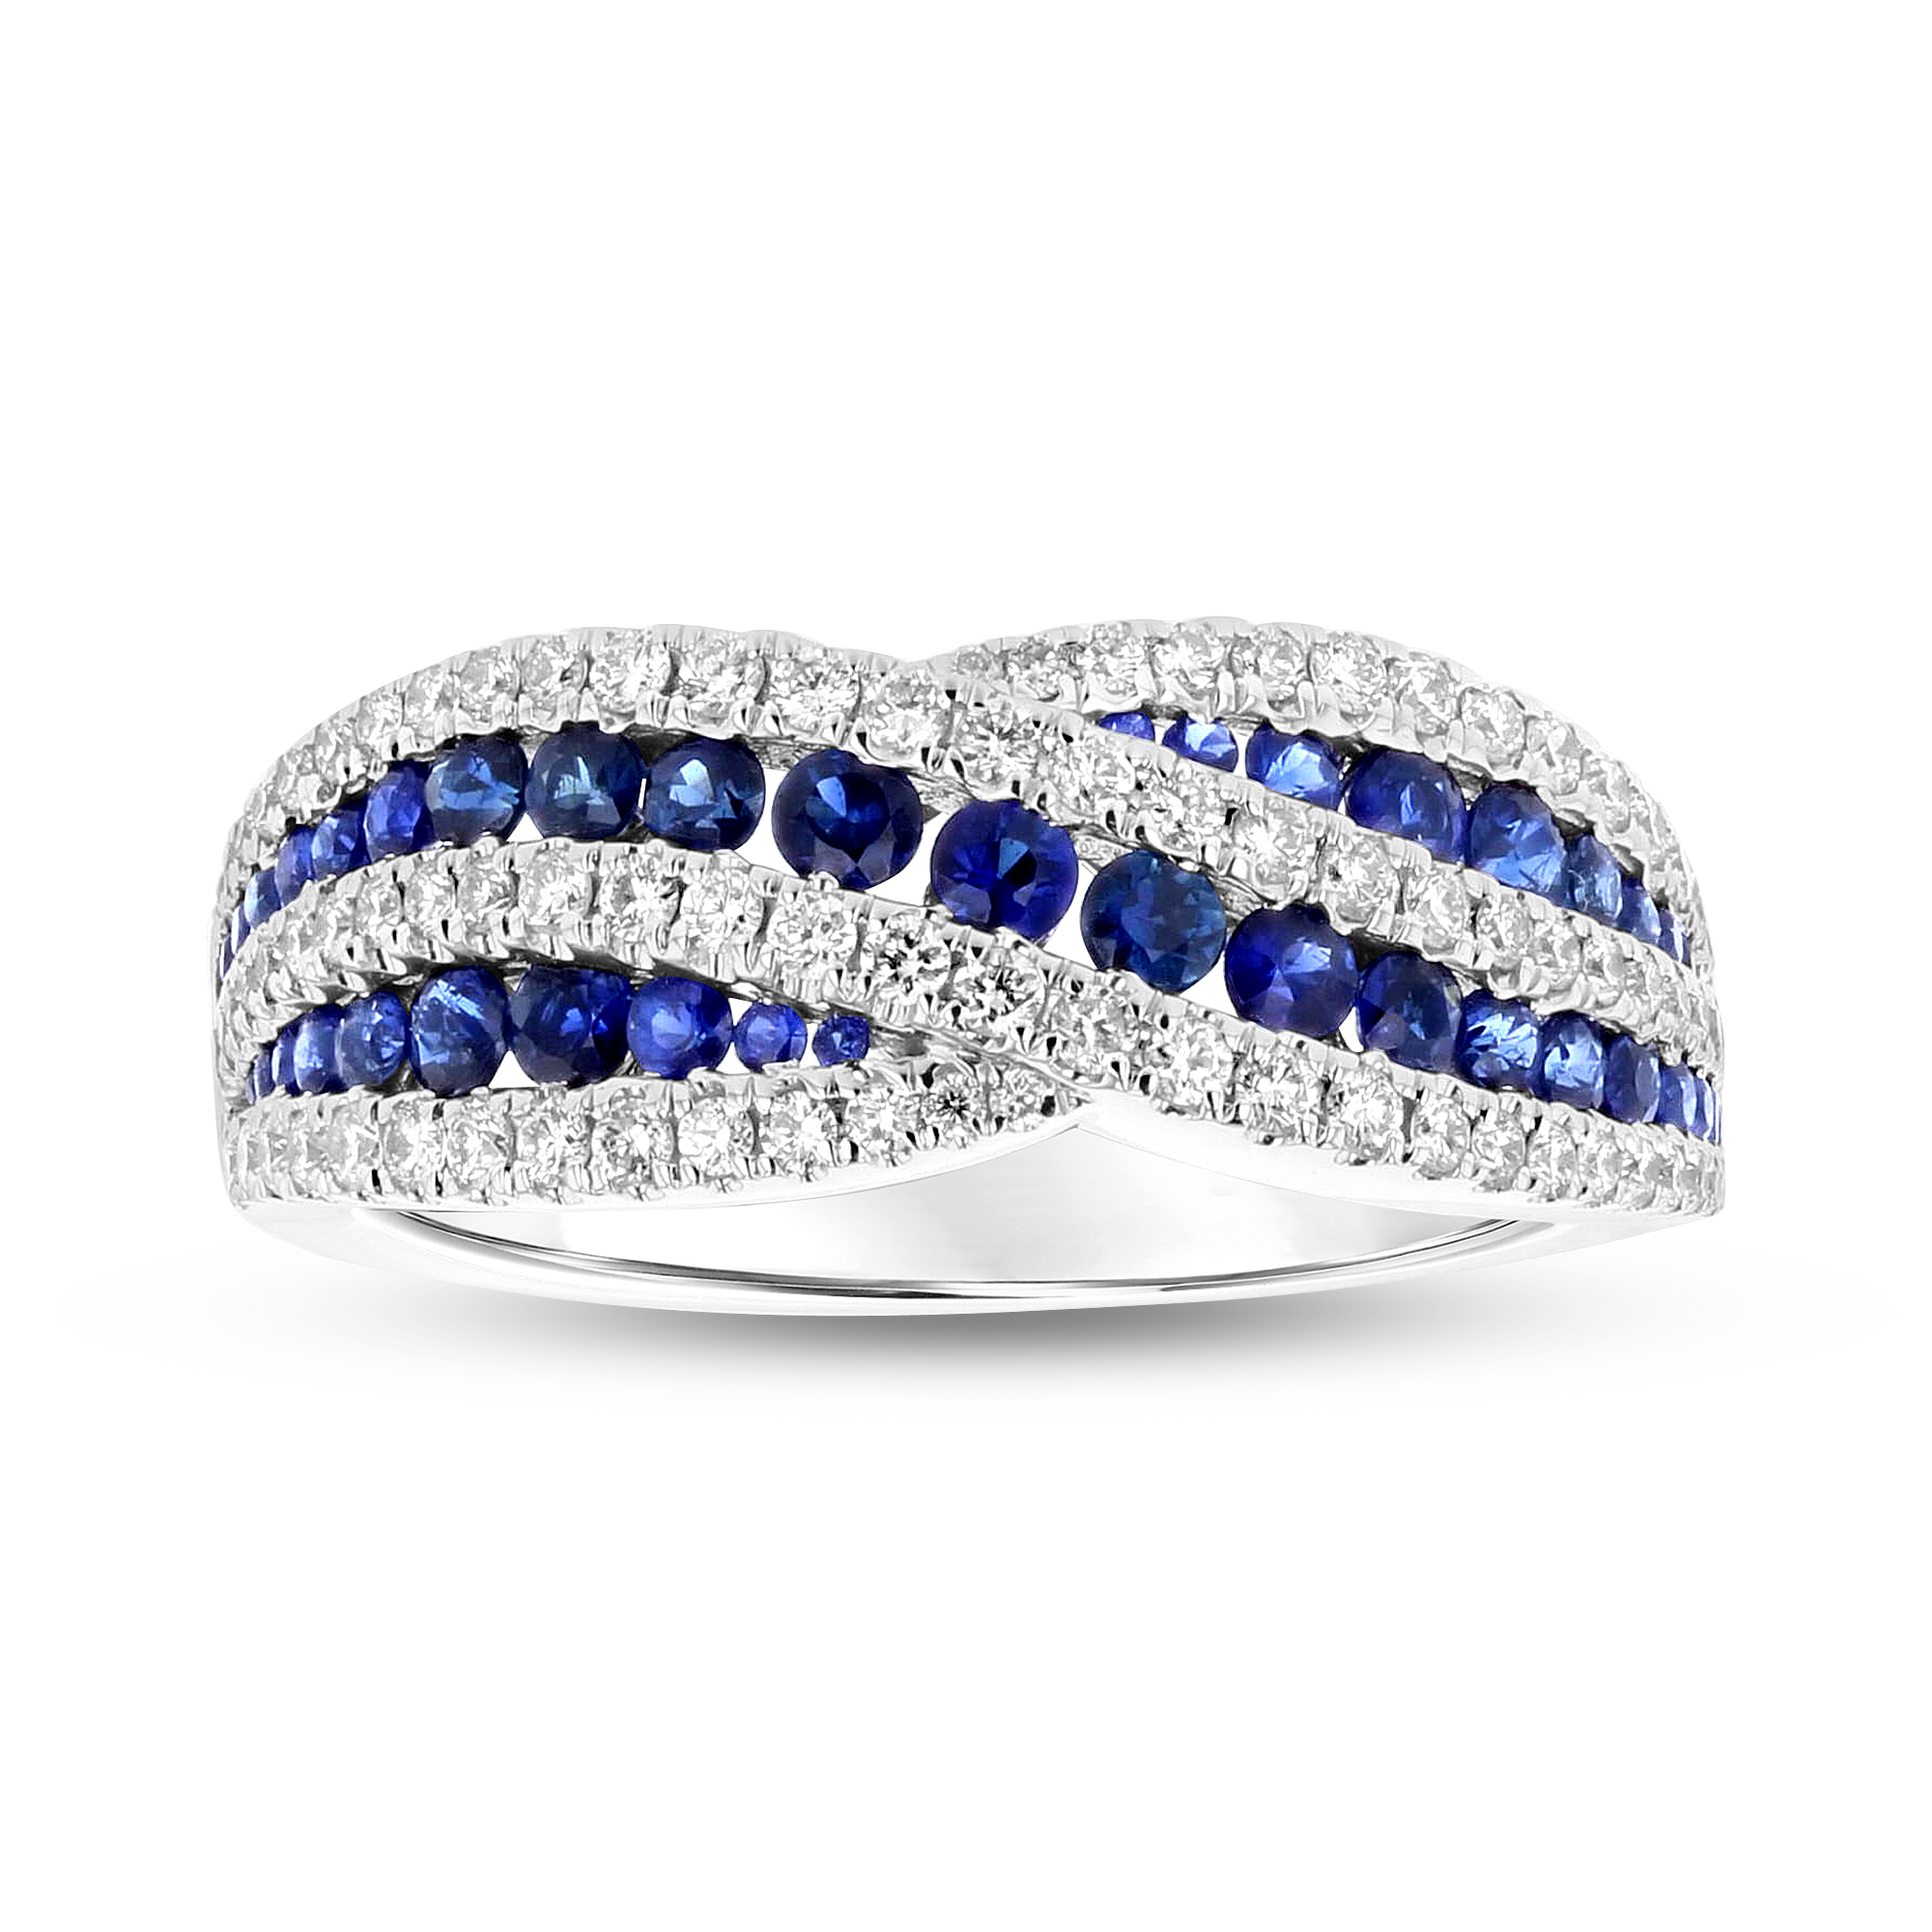 View 0.49ctw Diamond and Sapphire Ring in 18k White Gold